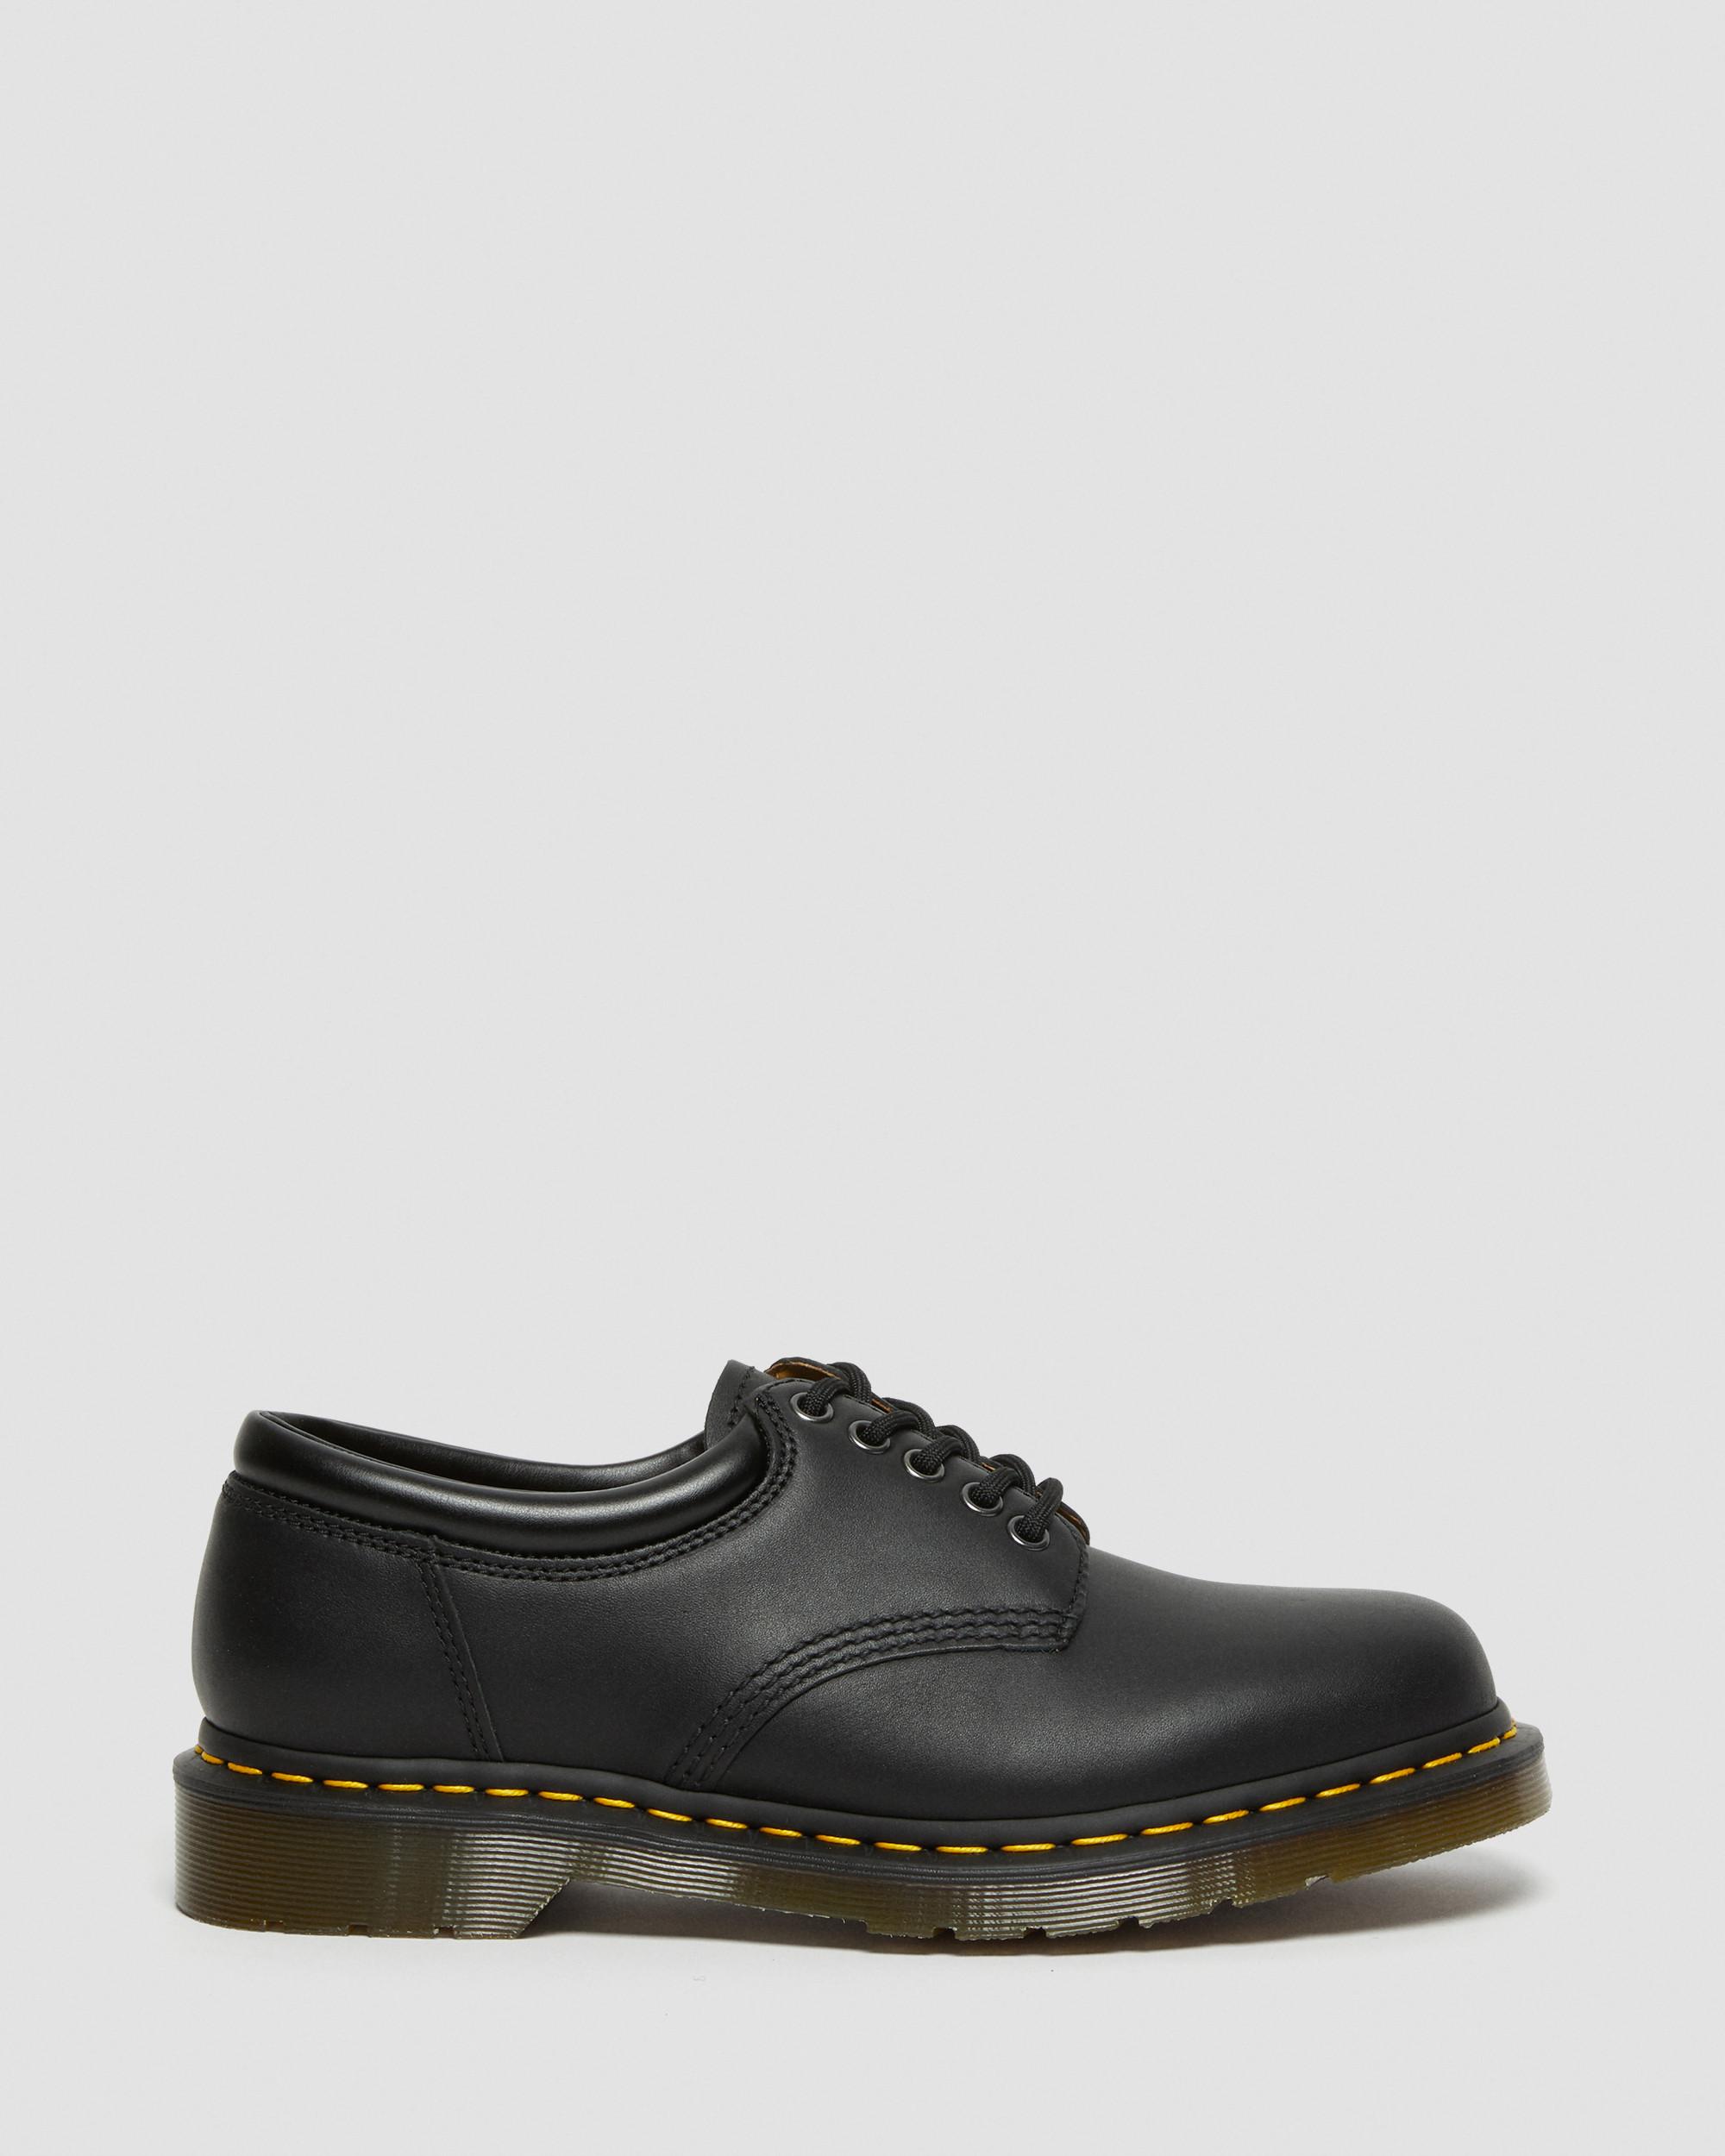 8053 Nappa Leather Casual Shoes | Dr. Martens